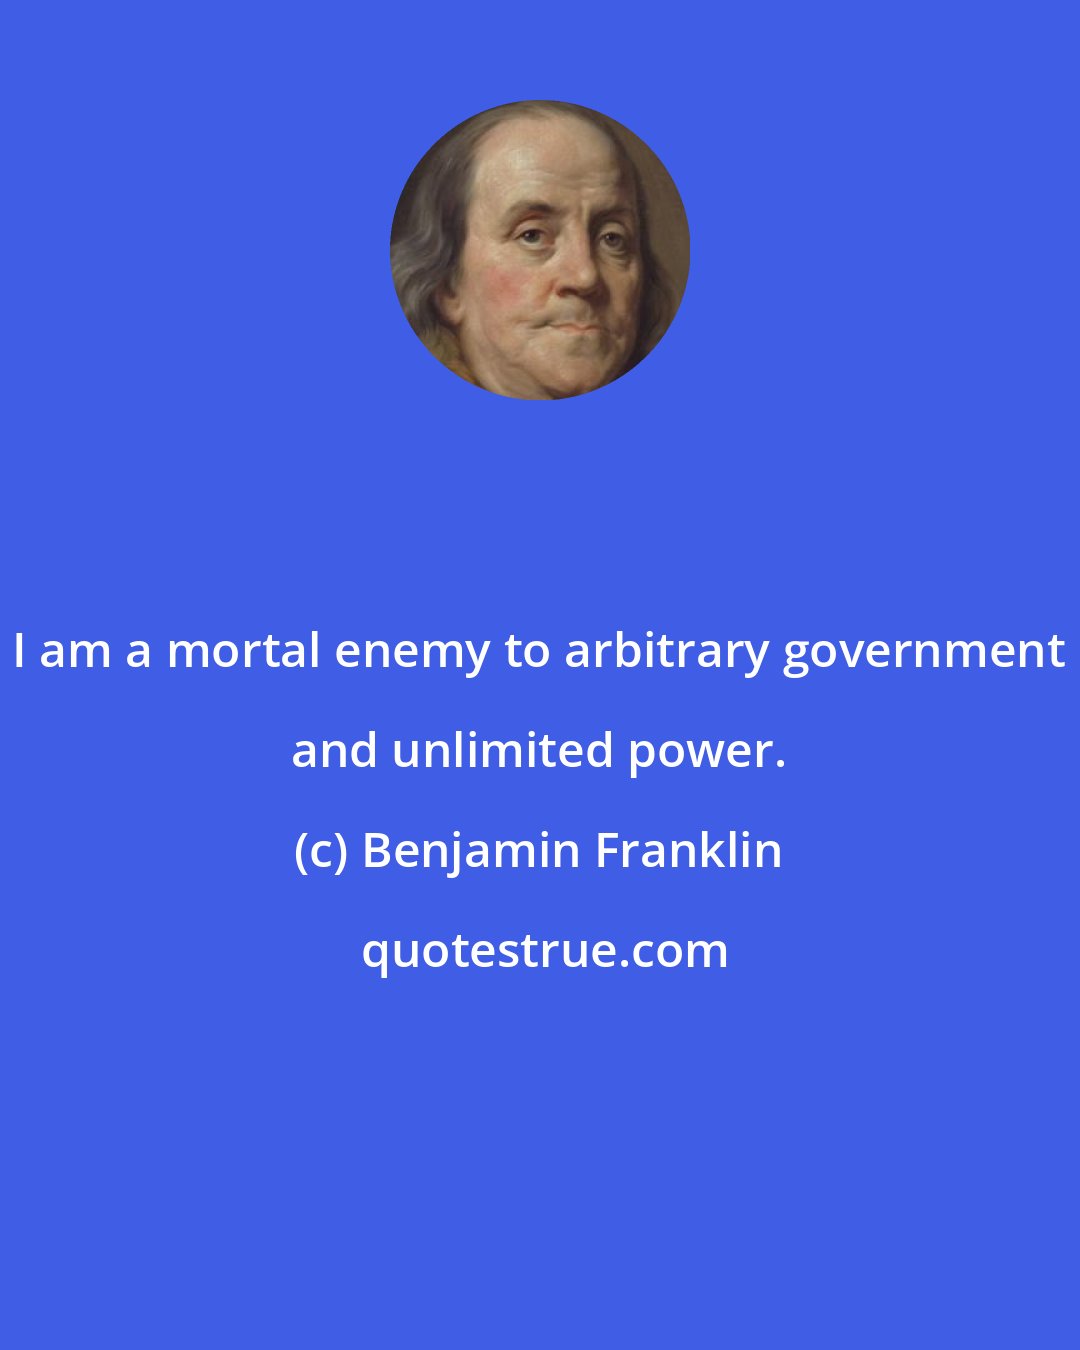 Benjamin Franklin: I am a mortal enemy to arbitrary government and unlimited power.